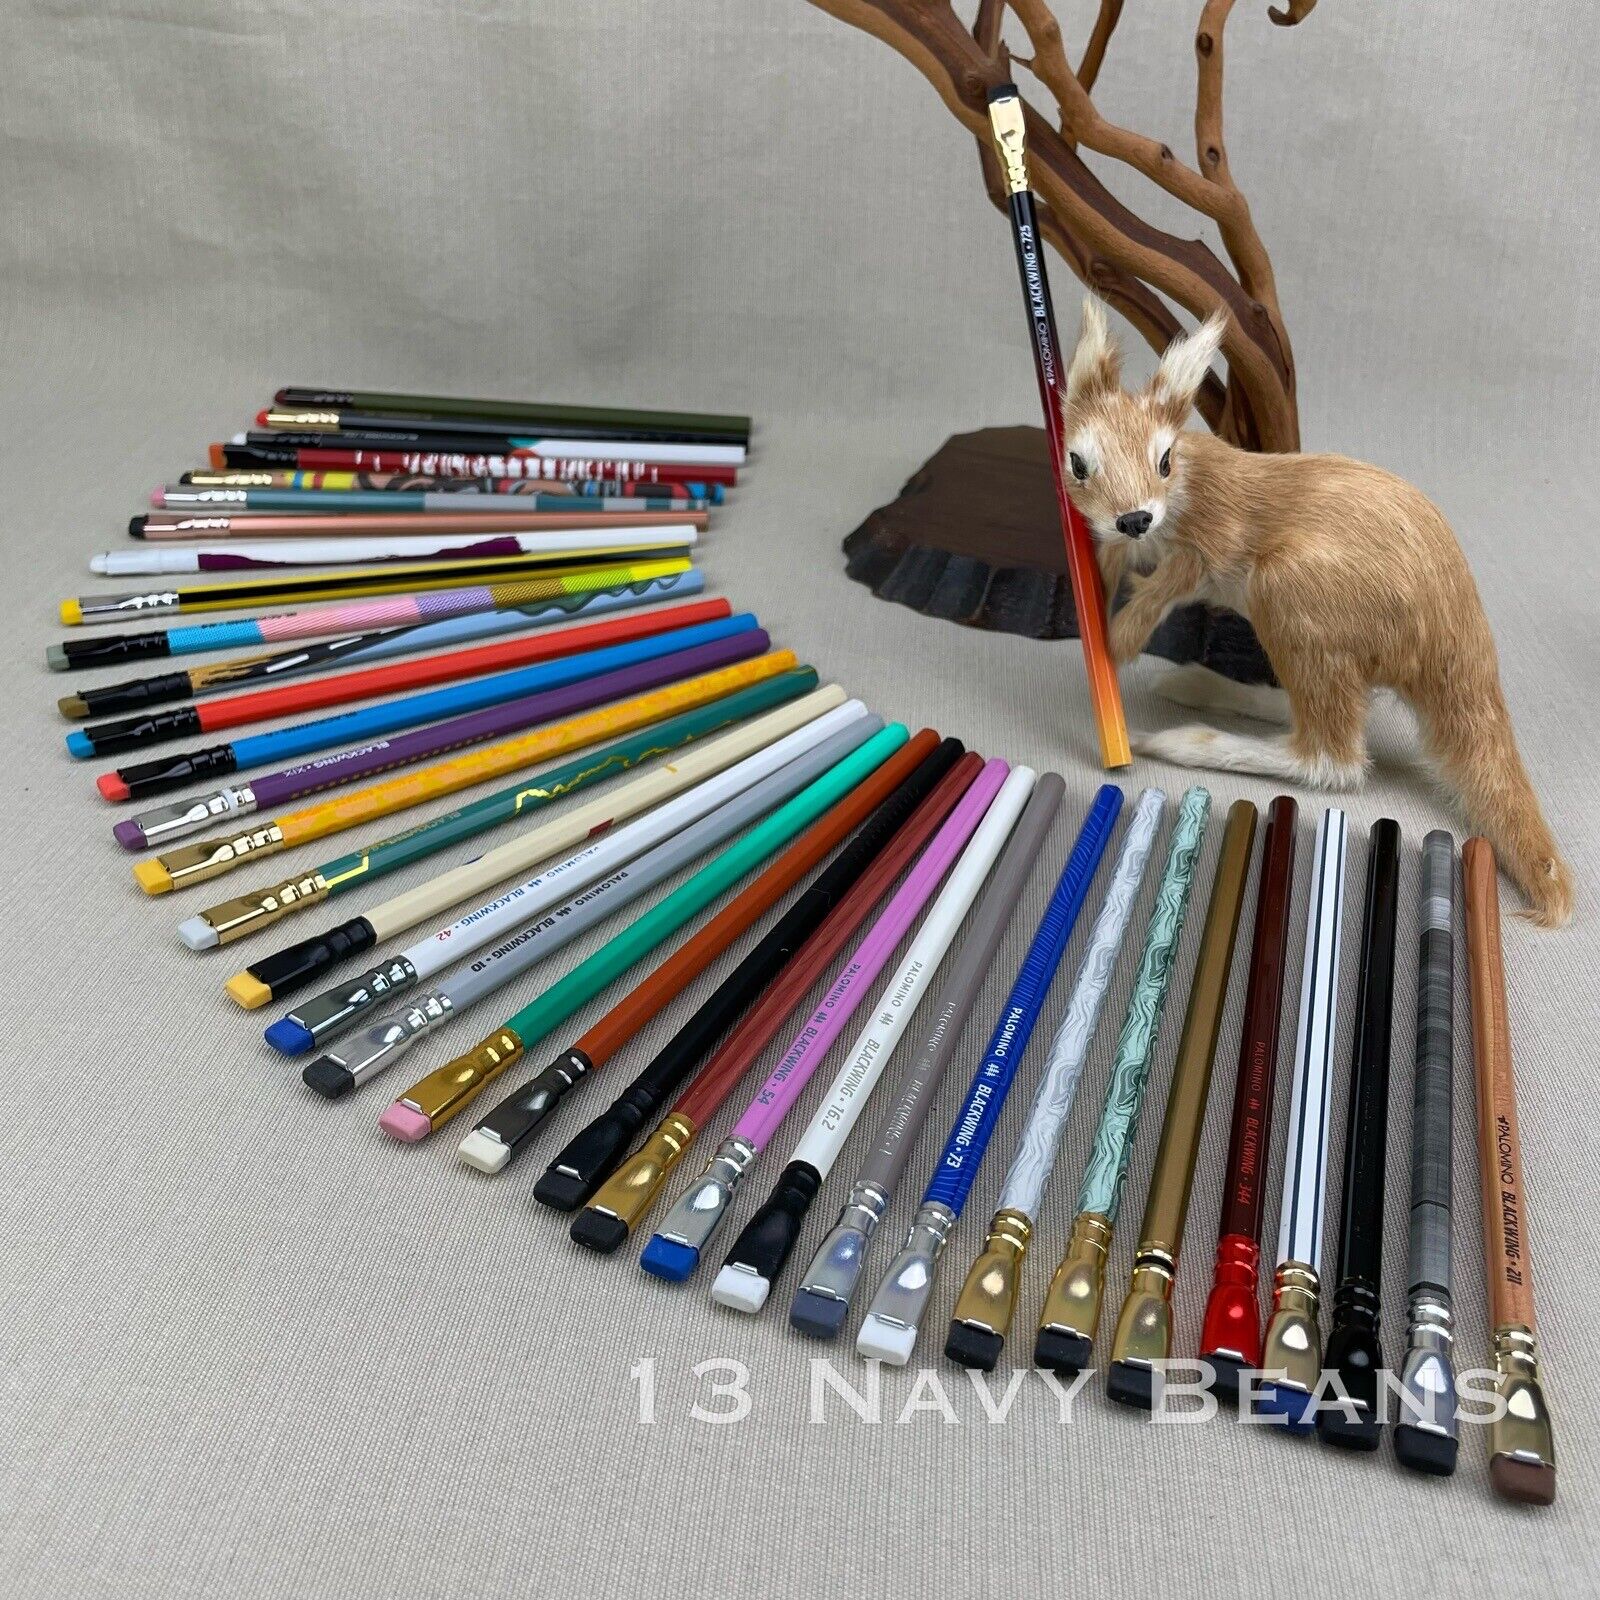 Every Blackwing Volume ~Single Pencils 725 211 1138 24 56 344 530 205 & More